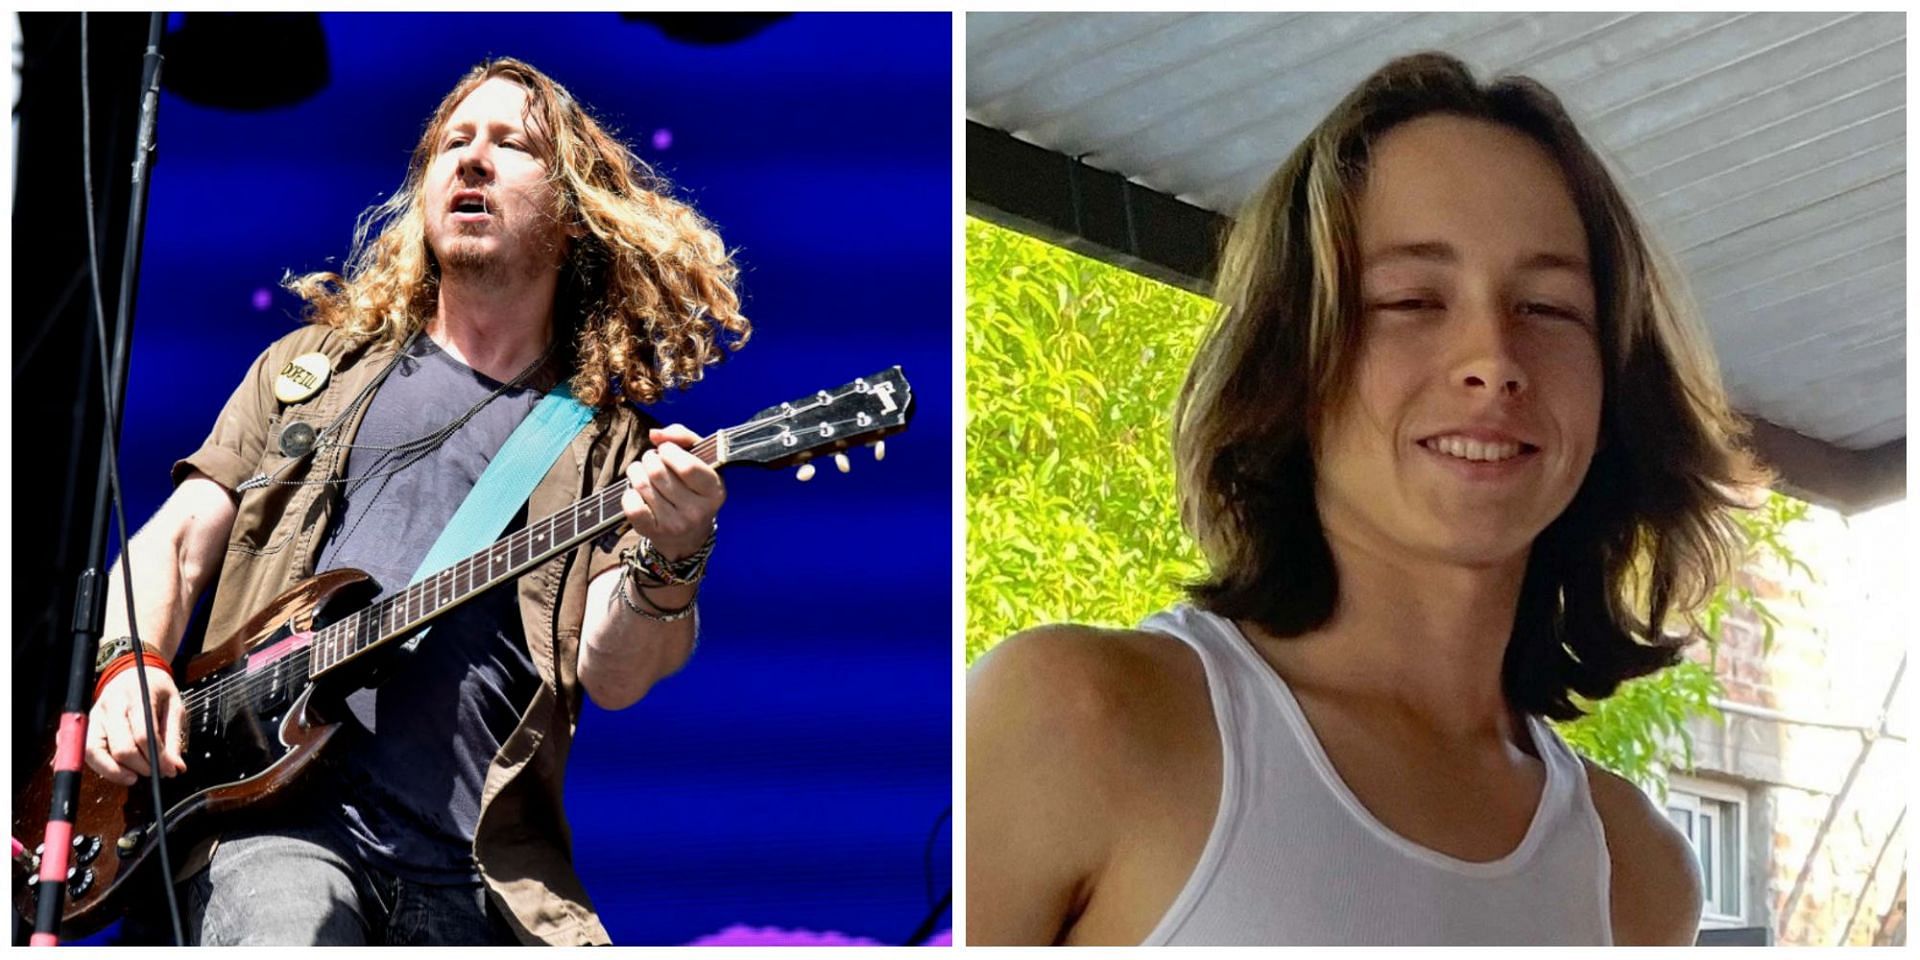 Social media users mourn the loss of Ben Kweller